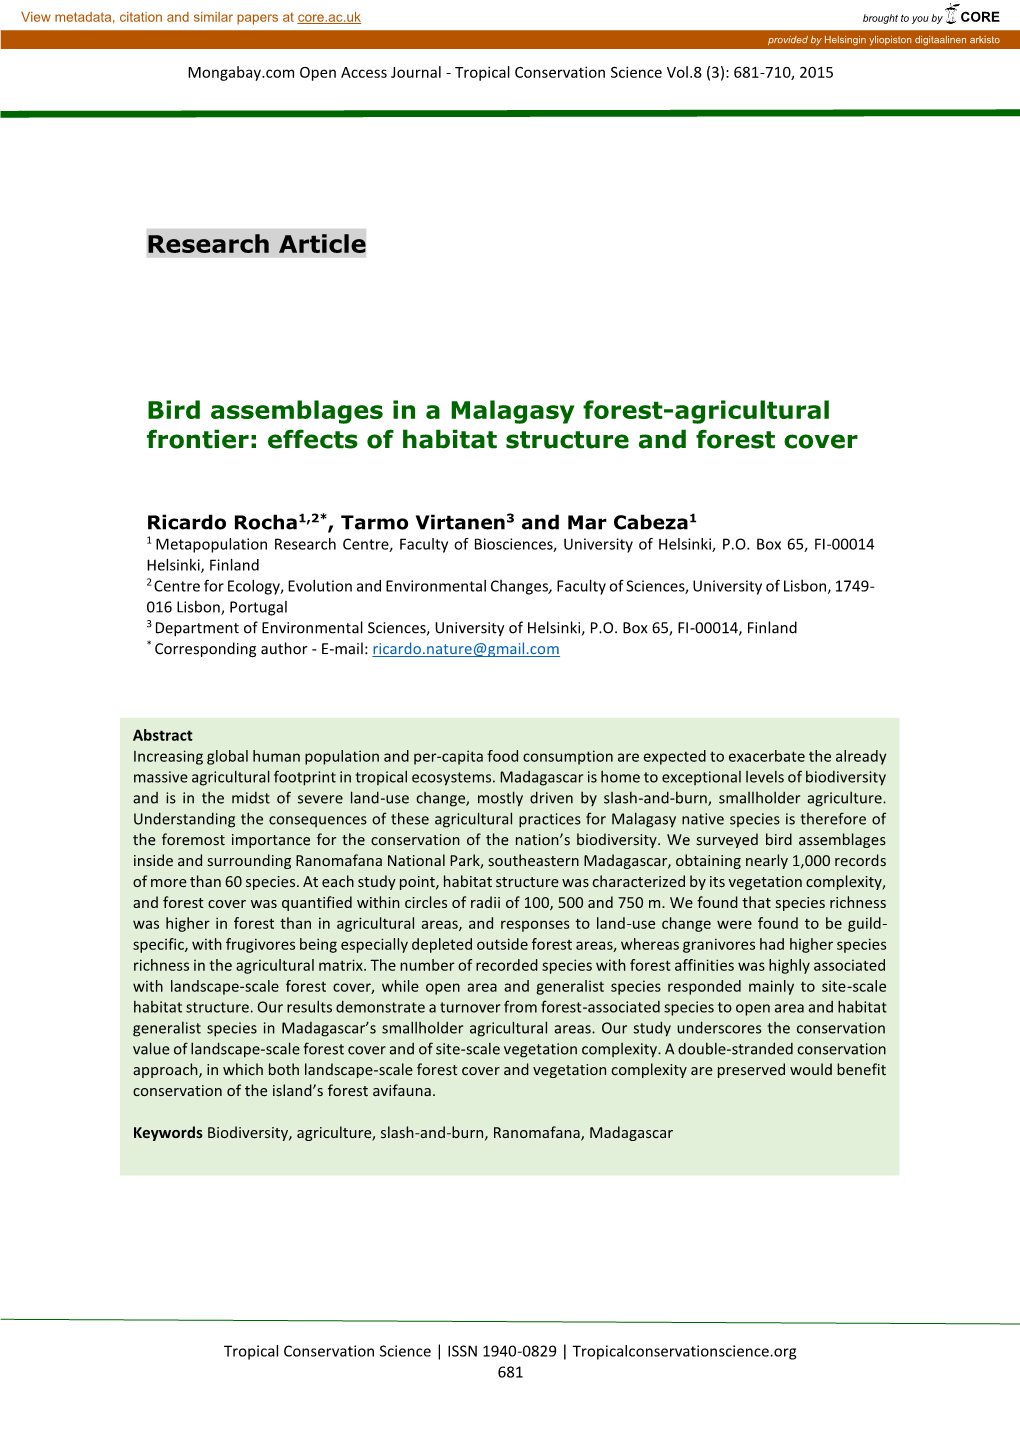 Bird Assemblages in a Malagasy Forest-Agricultural Frontier: Effects of Habitat Structure and Forest Cover